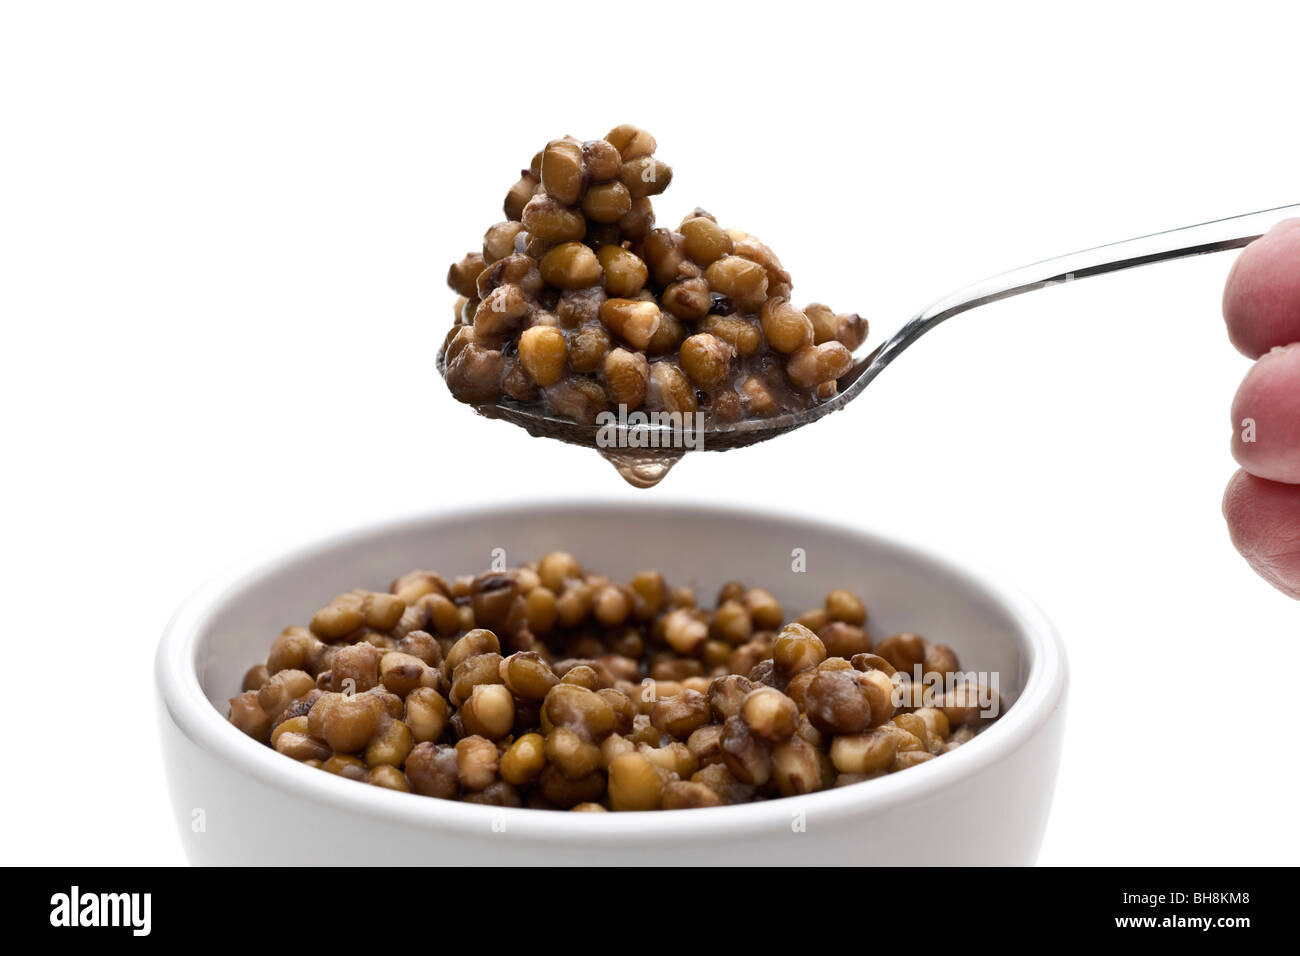 Dish and spoon full of cooked Mung beans in water Stock Photo